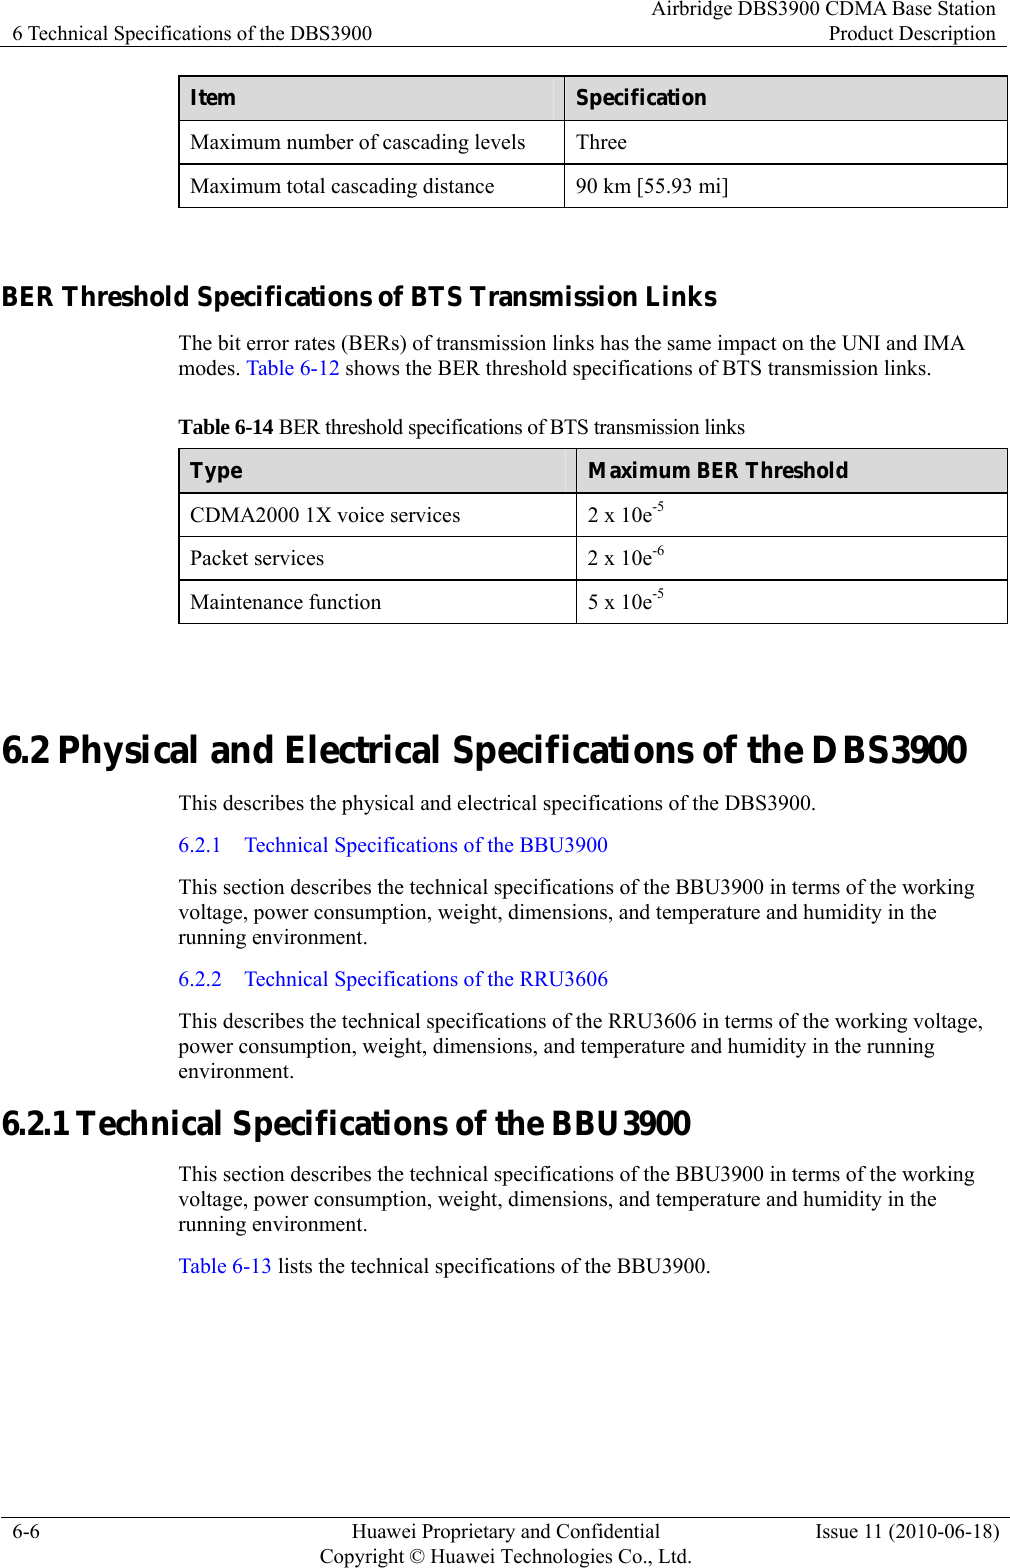 6 Technical Specifications of the DBS3900 Airbridge DBS3900 CDMA Base StationProduct Description 6-6  Huawei Proprietary and Confidential     Copyright © Huawei Technologies Co., Ltd.Issue 11 (2010-06-18) Item  Specification Maximum number of cascading levels  Three Maximum total cascading distance  90 km [55.93 mi]  BER Threshold Specifications of BTS Transmission Links The bit error rates (BERs) of transmission links has the same impact on the UNI and IMA modes. Table 6-12 shows the BER threshold specifications of BTS transmission links. Table 6-14 BER threshold specifications of BTS transmission links Type  Maximum BER Threshold CDMA2000 1X voice services  2 x 10e-5 Packet services  2 x 10e-6 Maintenance function  5 x 10e-5  6.2 Physical and Electrical Specifications of the DBS3900 This describes the physical and electrical specifications of the DBS3900. 6.2.1    Technical Specifications of the BBU3900 This section describes the technical specifications of the BBU3900 in terms of the working voltage, power consumption, weight, dimensions, and temperature and humidity in the running environment.   6.2.2    Technical Specifications of the RRU3606 This describes the technical specifications of the RRU3606 in terms of the working voltage, power consumption, weight, dimensions, and temperature and humidity in the running environment. 6.2.1 Technical Specifications of the BBU3900 This section describes the technical specifications of the BBU3900 in terms of the working voltage, power consumption, weight, dimensions, and temperature and humidity in the running environment.   Table 6-13 lists the technical specifications of the BBU3900. 